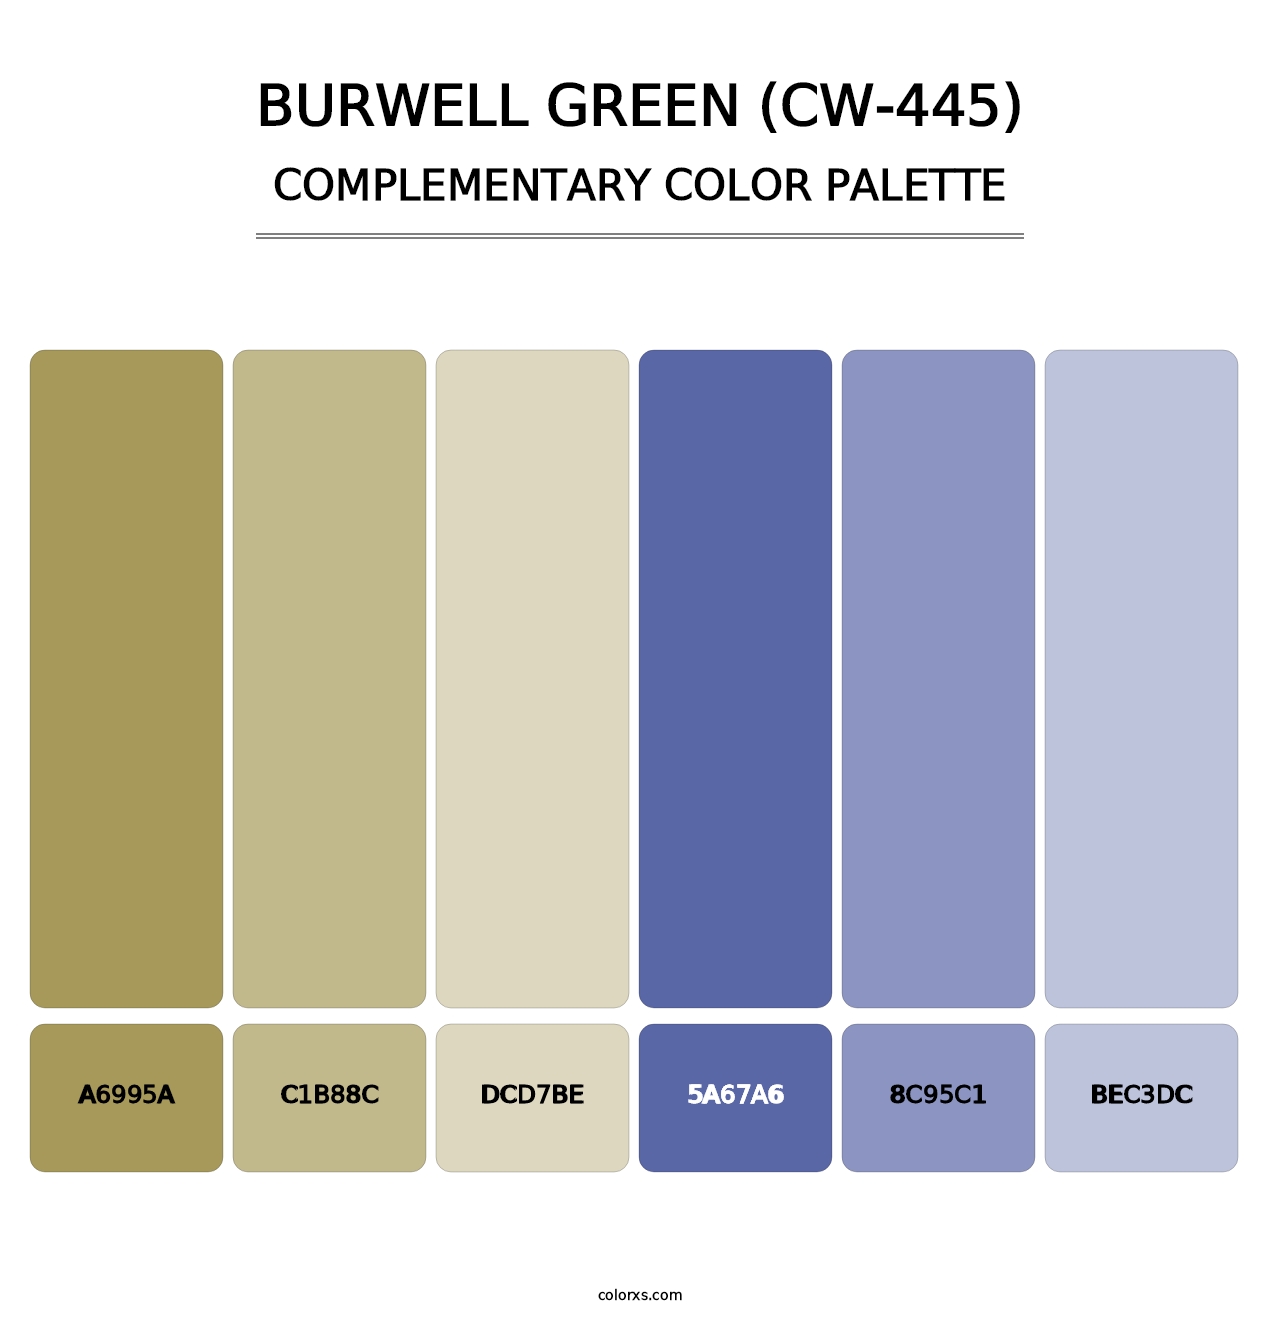 Burwell Green (CW-445) - Complementary Color Palette